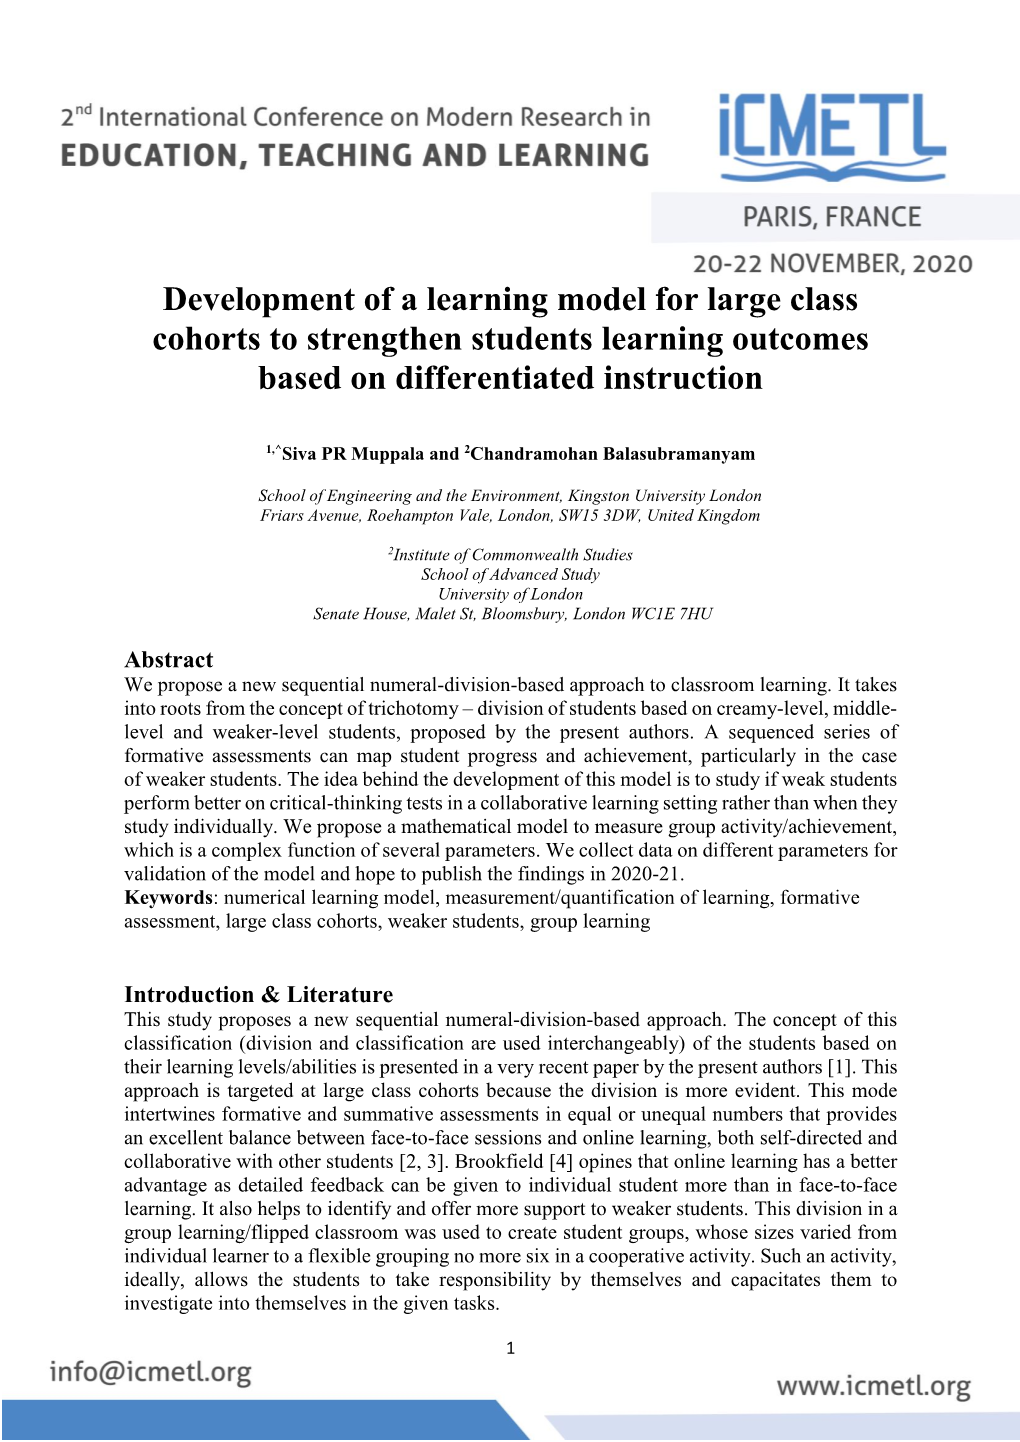 Development of a Learning Model for Large Class Cohorts to Strengthen Students Learning Outcomes Based on Differentiated Instruction